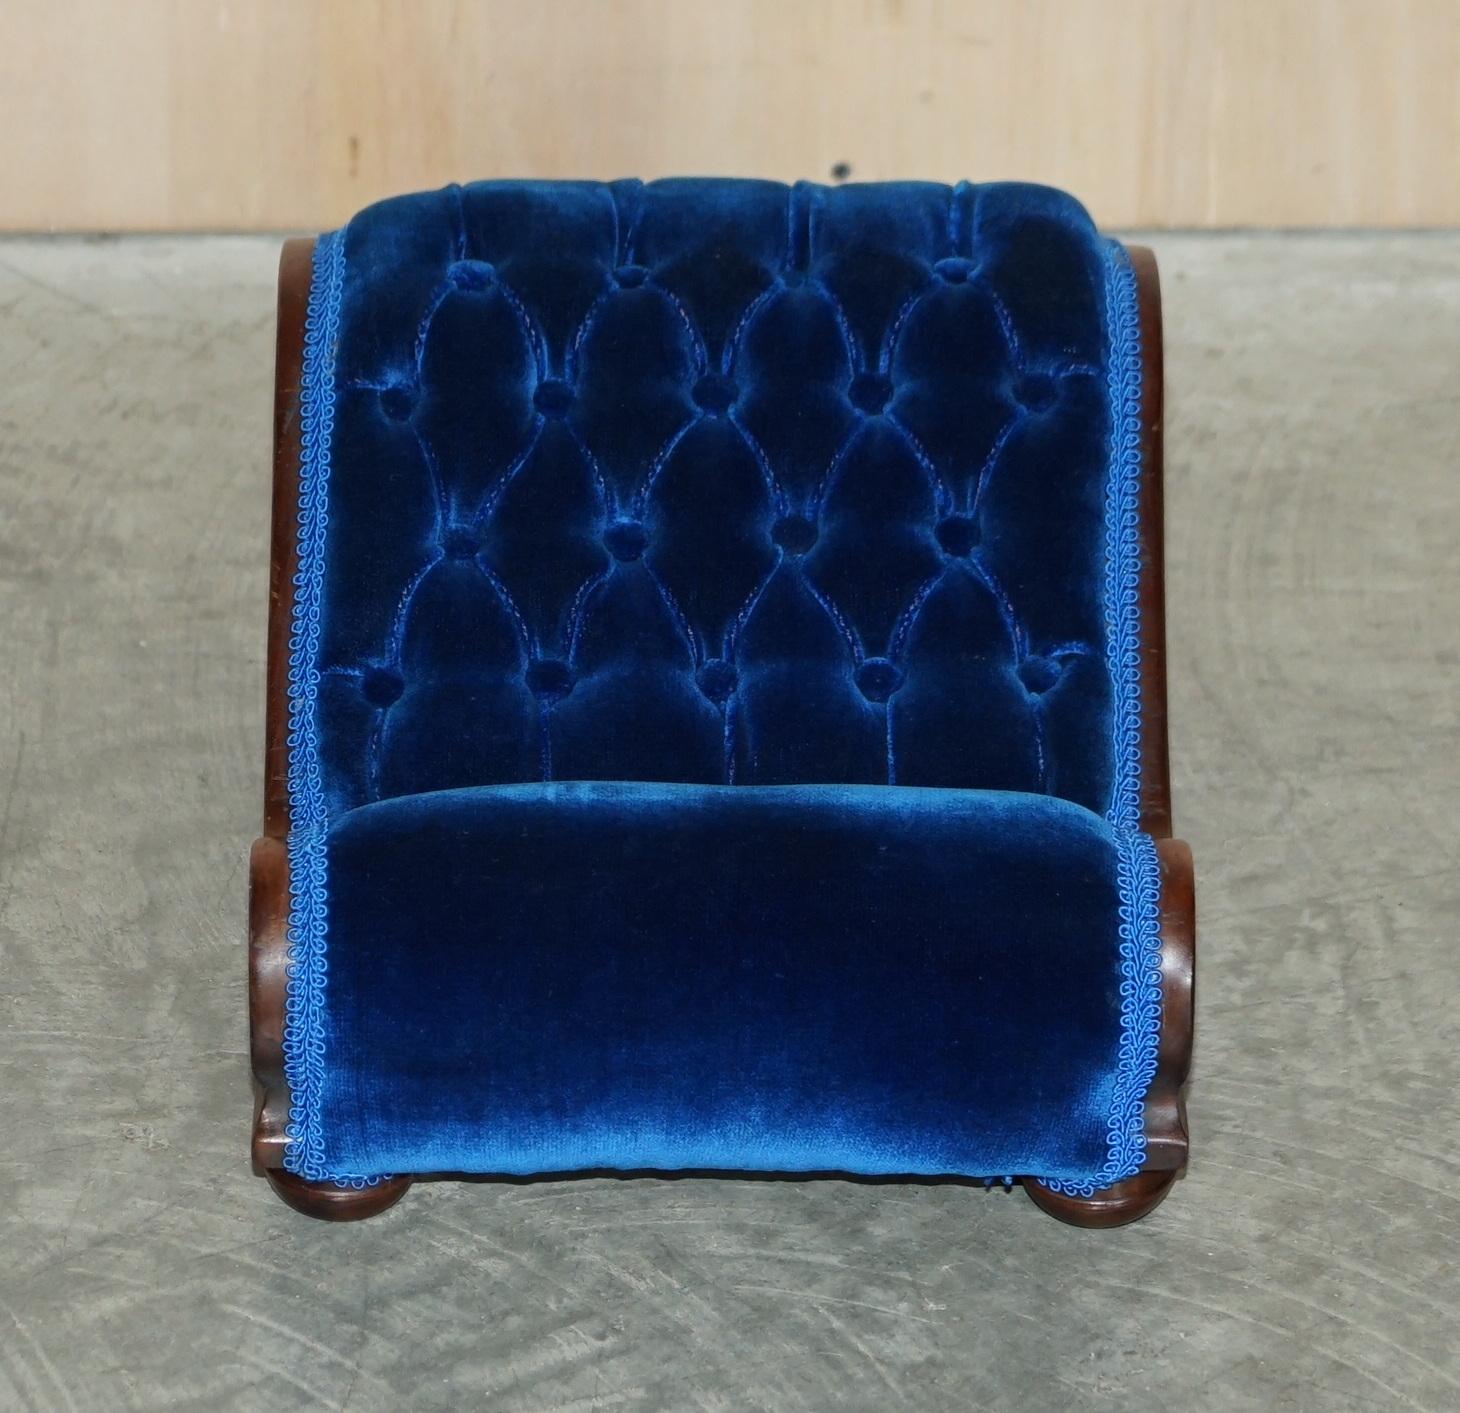 Late Victorian PAIR OF REGENCY BLUE ANTIQUE ViCTORIAN CHESTERFIELD TUFTED CURVED FOOTSTOOLS